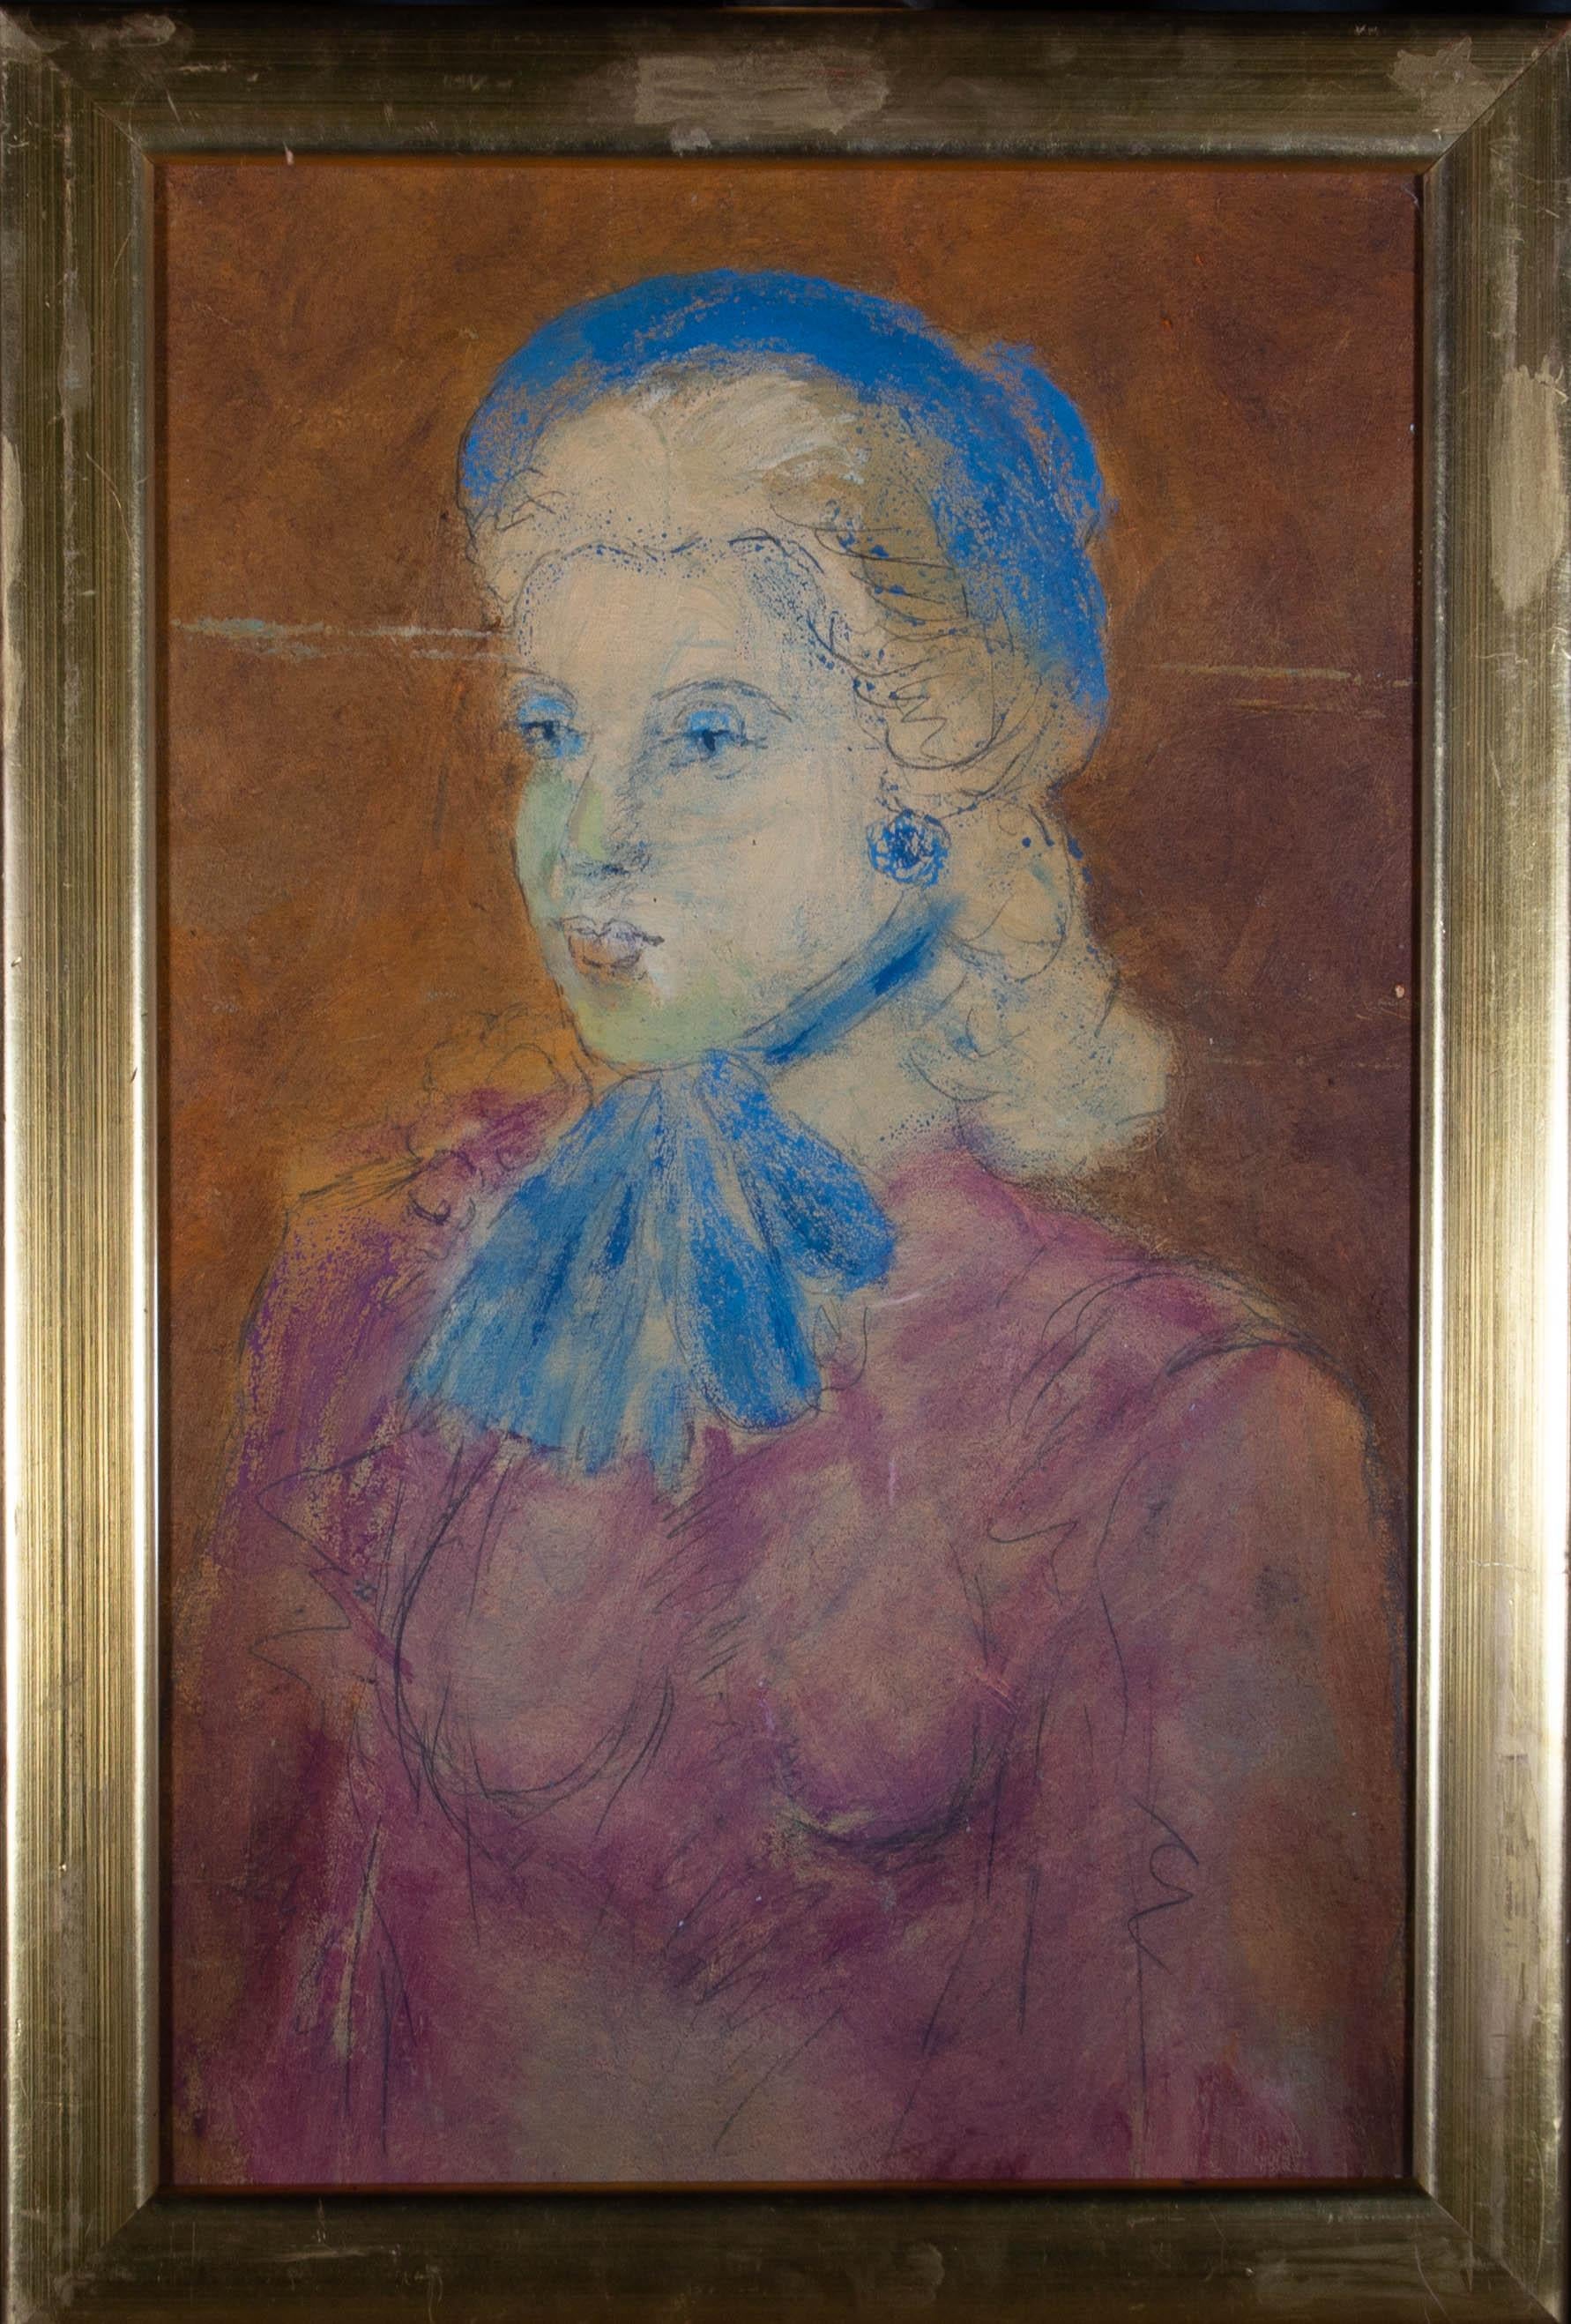 Unknown Portrait Painting - Mid 20th Century Oil - Fashionable Woman